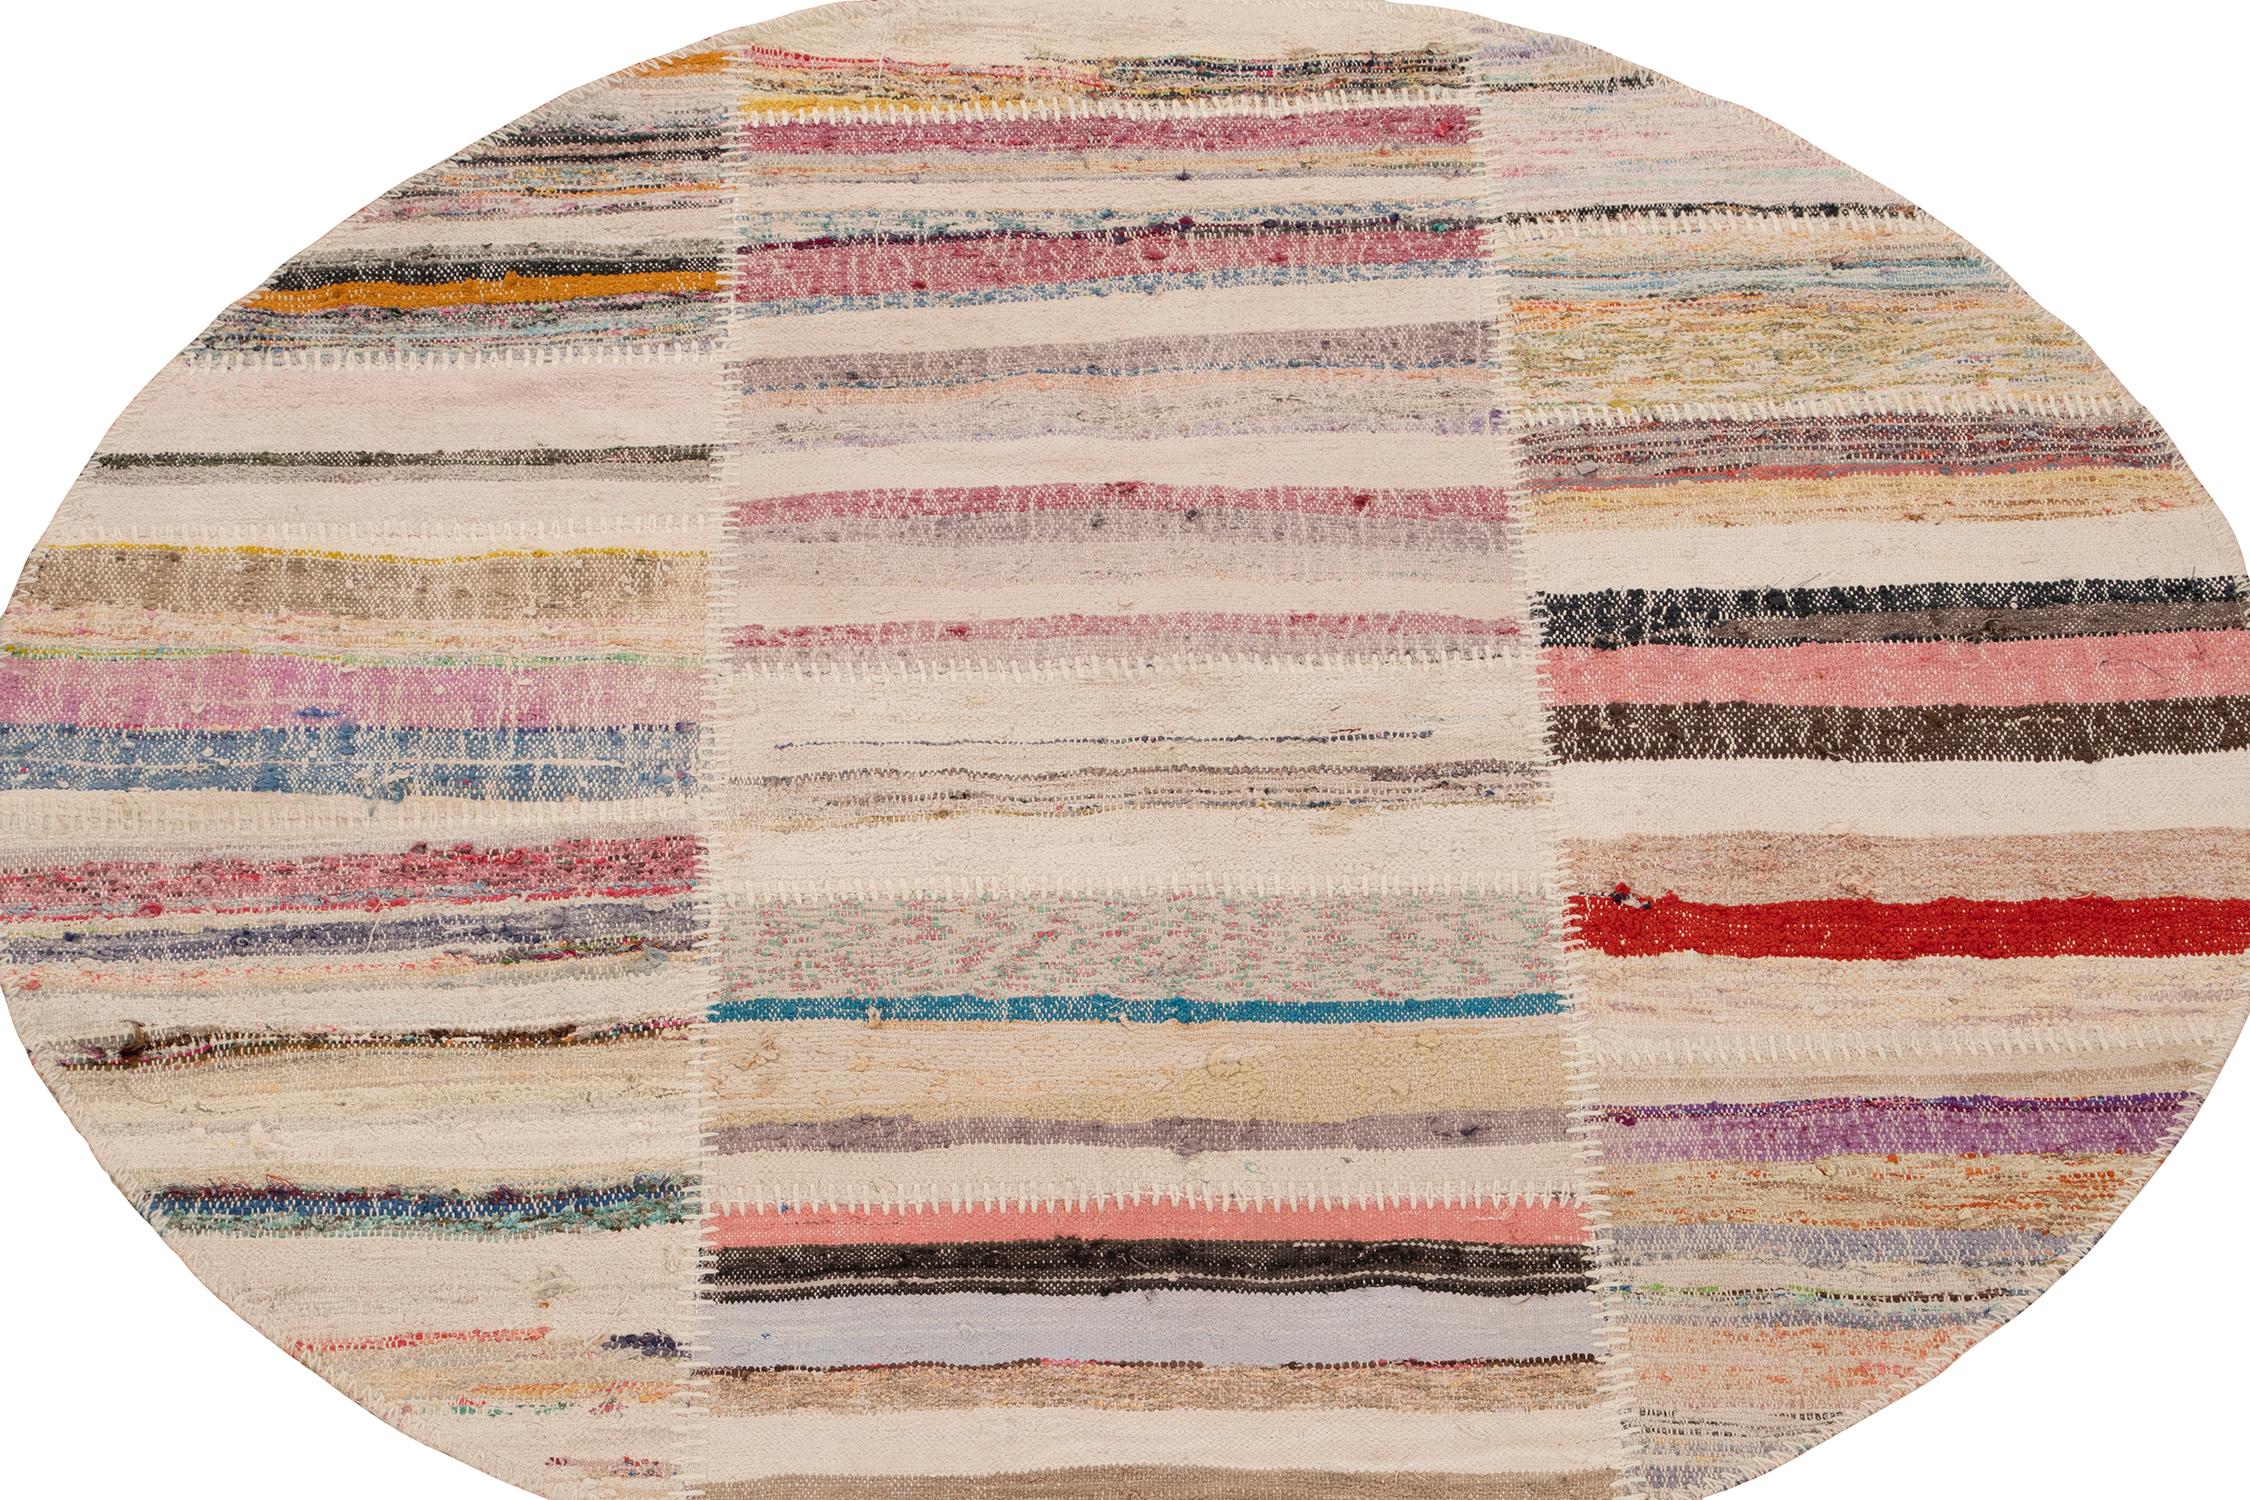 Rug & Kilim presents a contemporary 5’ circle rug from their innovative new patchwork kilim collection.
Further on the design:
This flat weave technique repurposes vintage yarns in polychromatic stripes and striae, achieving a playful look with